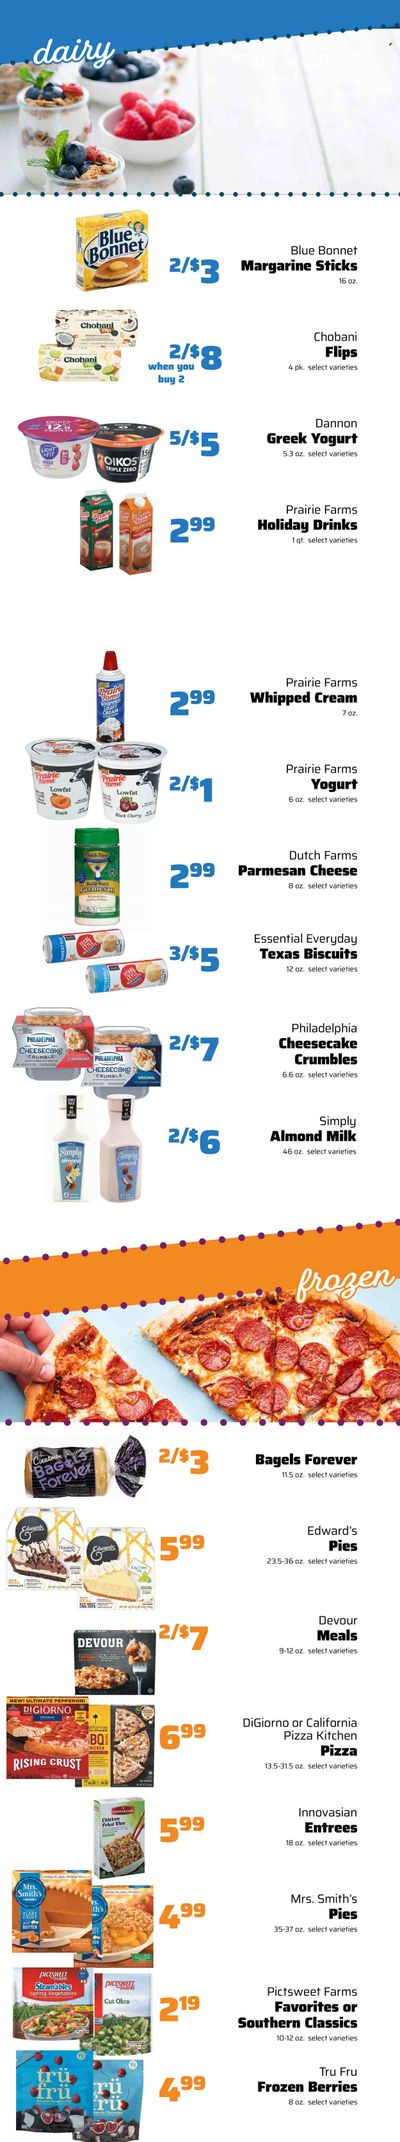 County Market (IL, IN, MO) Weekly Ad Flyer Specials November 9 to November 15, 2022